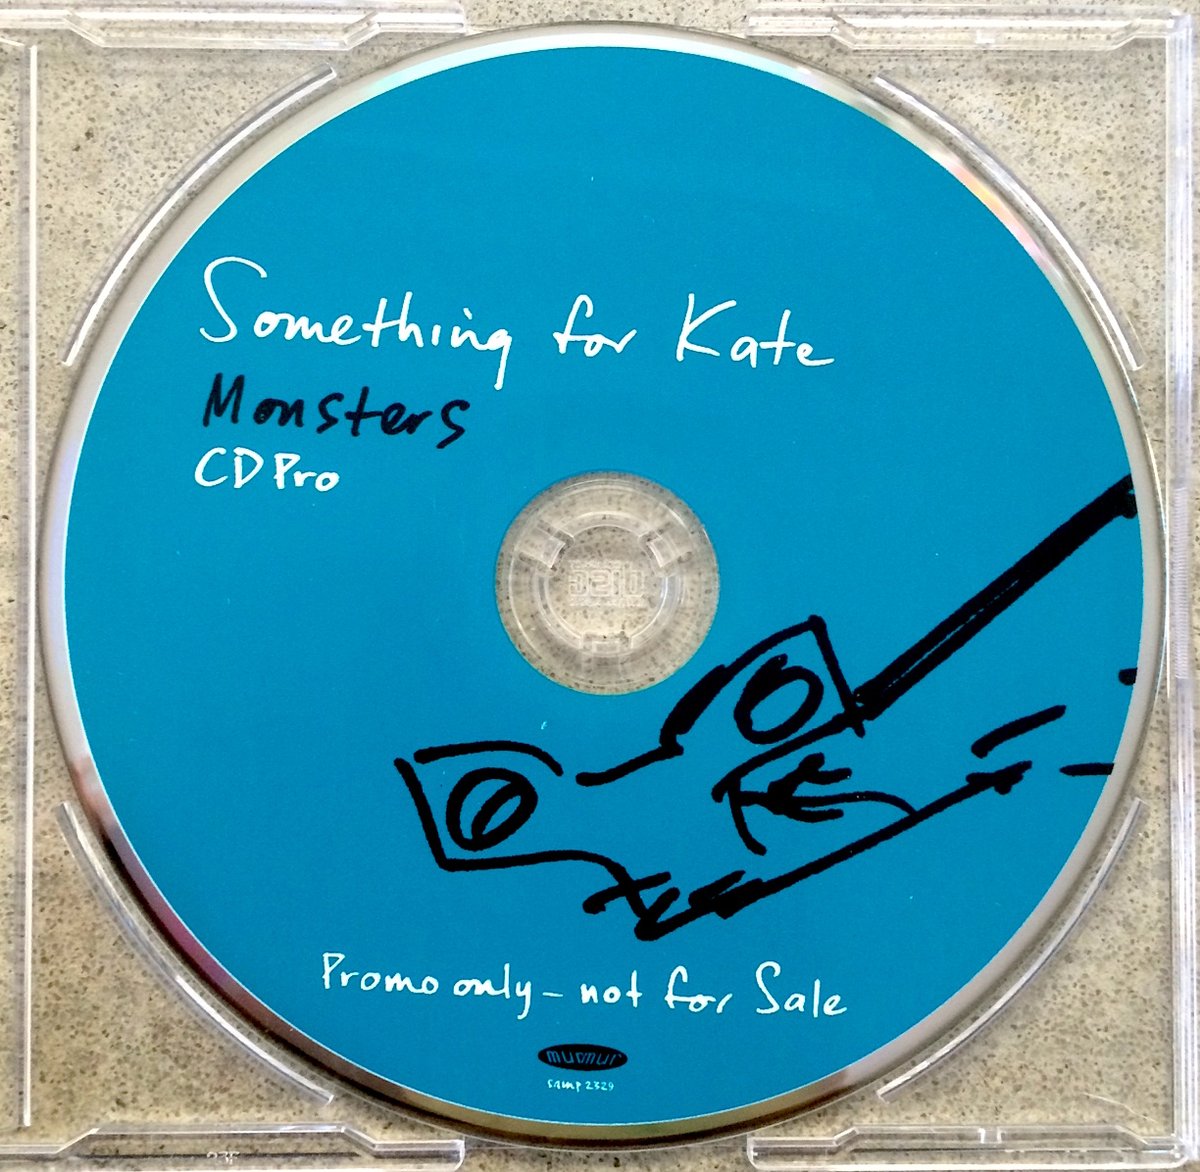 Image of Something for Kate - 'Monsters' CD Pro 2001